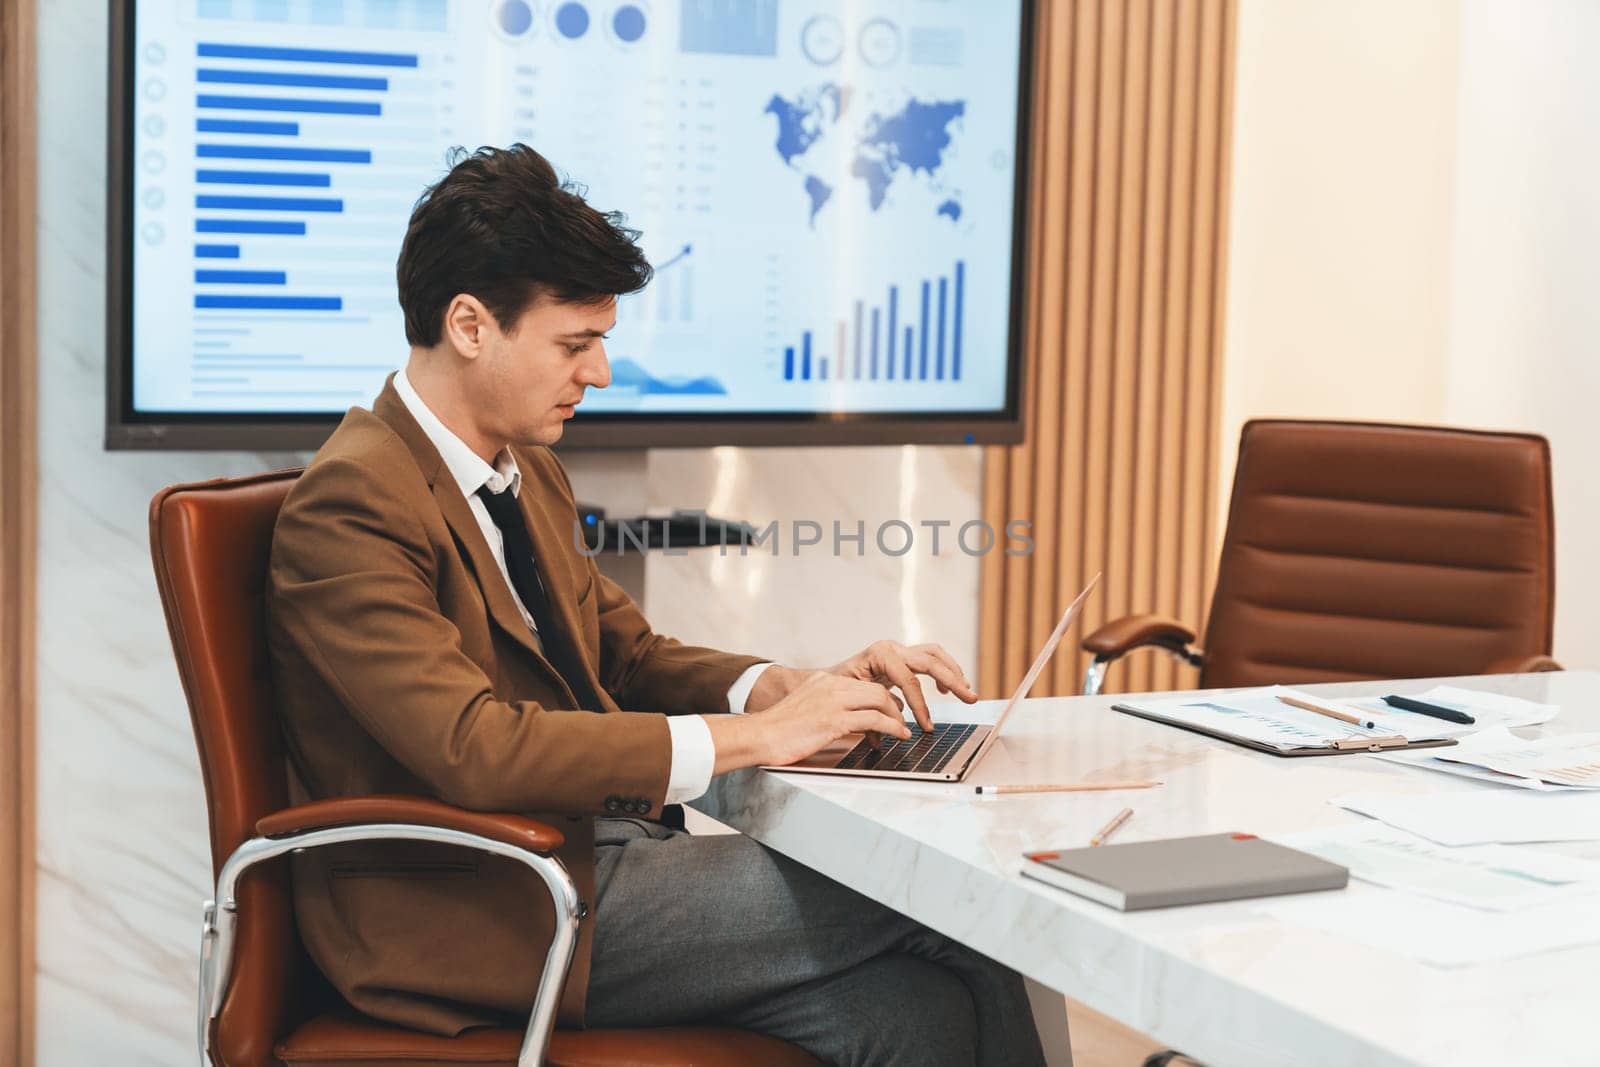 Professional businessman analysis data by using laptop at meeting. Project manager looking at laptop on meeting table while projector displayed graph and financial statistic with document. Ornamented.